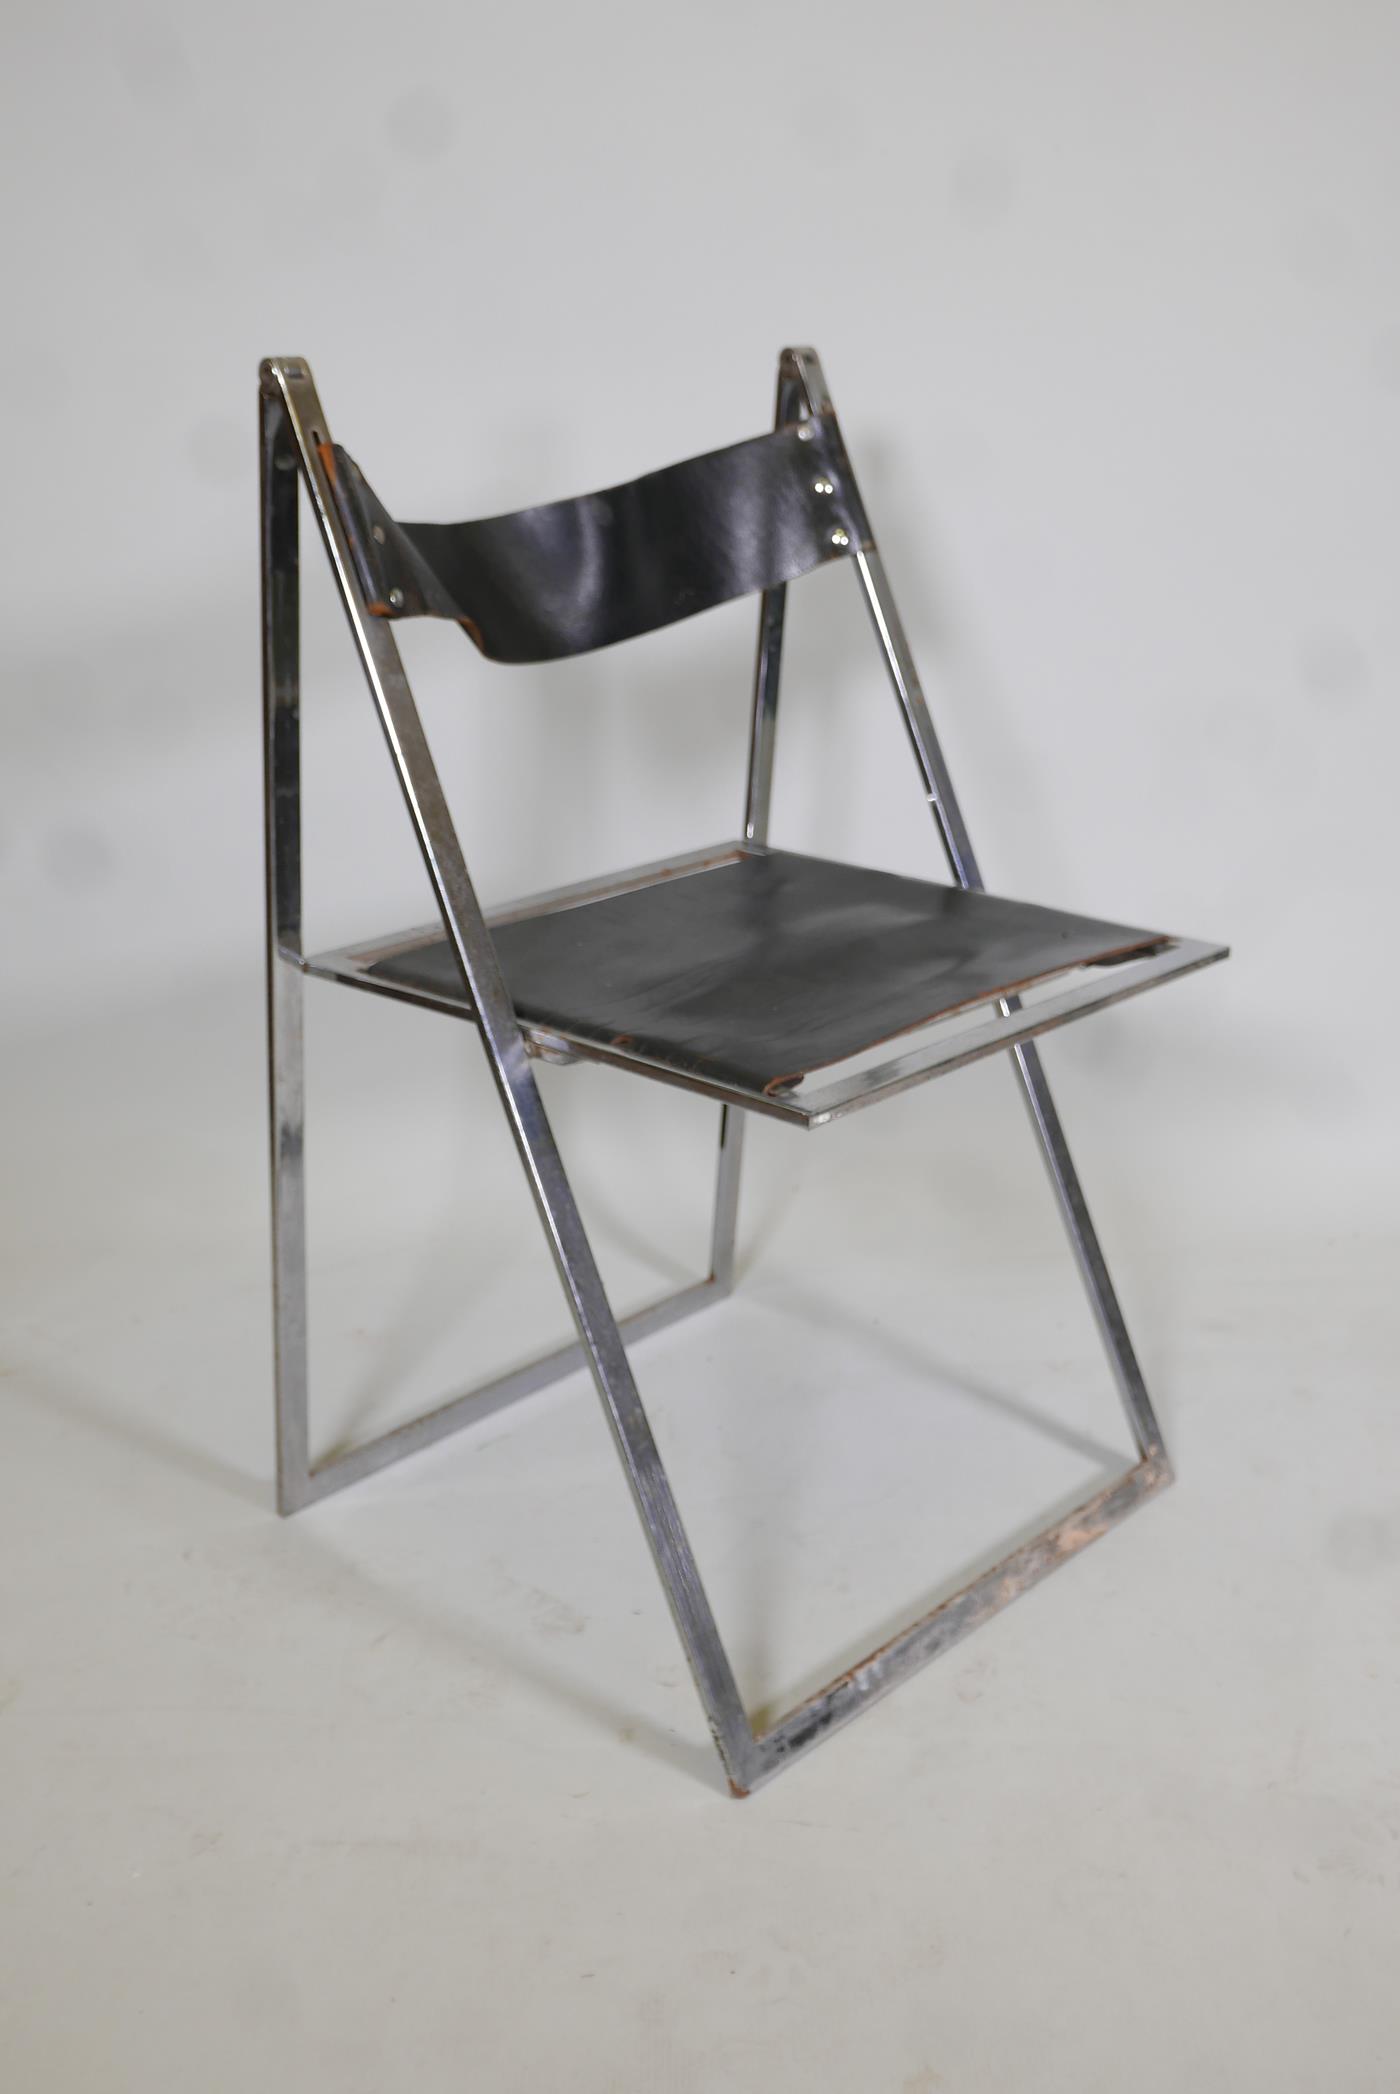 A pair of Italian mid century Elios chrome & leather folding chairs, designed by Fontoni & Geraci, - Image 3 of 6